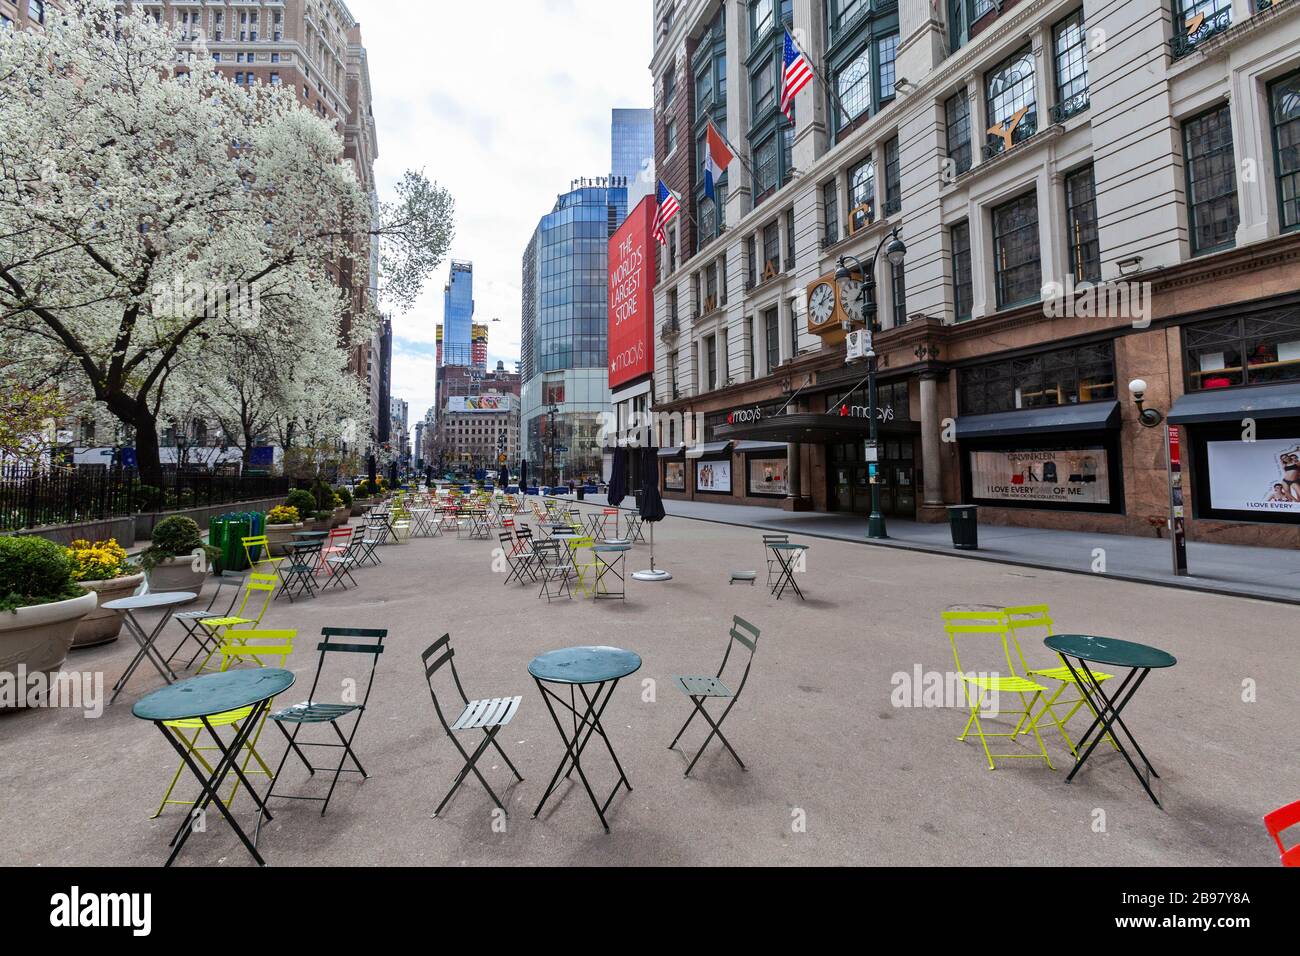 Few people on the empty streets in New York City because of COVID-19, Coronavirus. Stock Photo